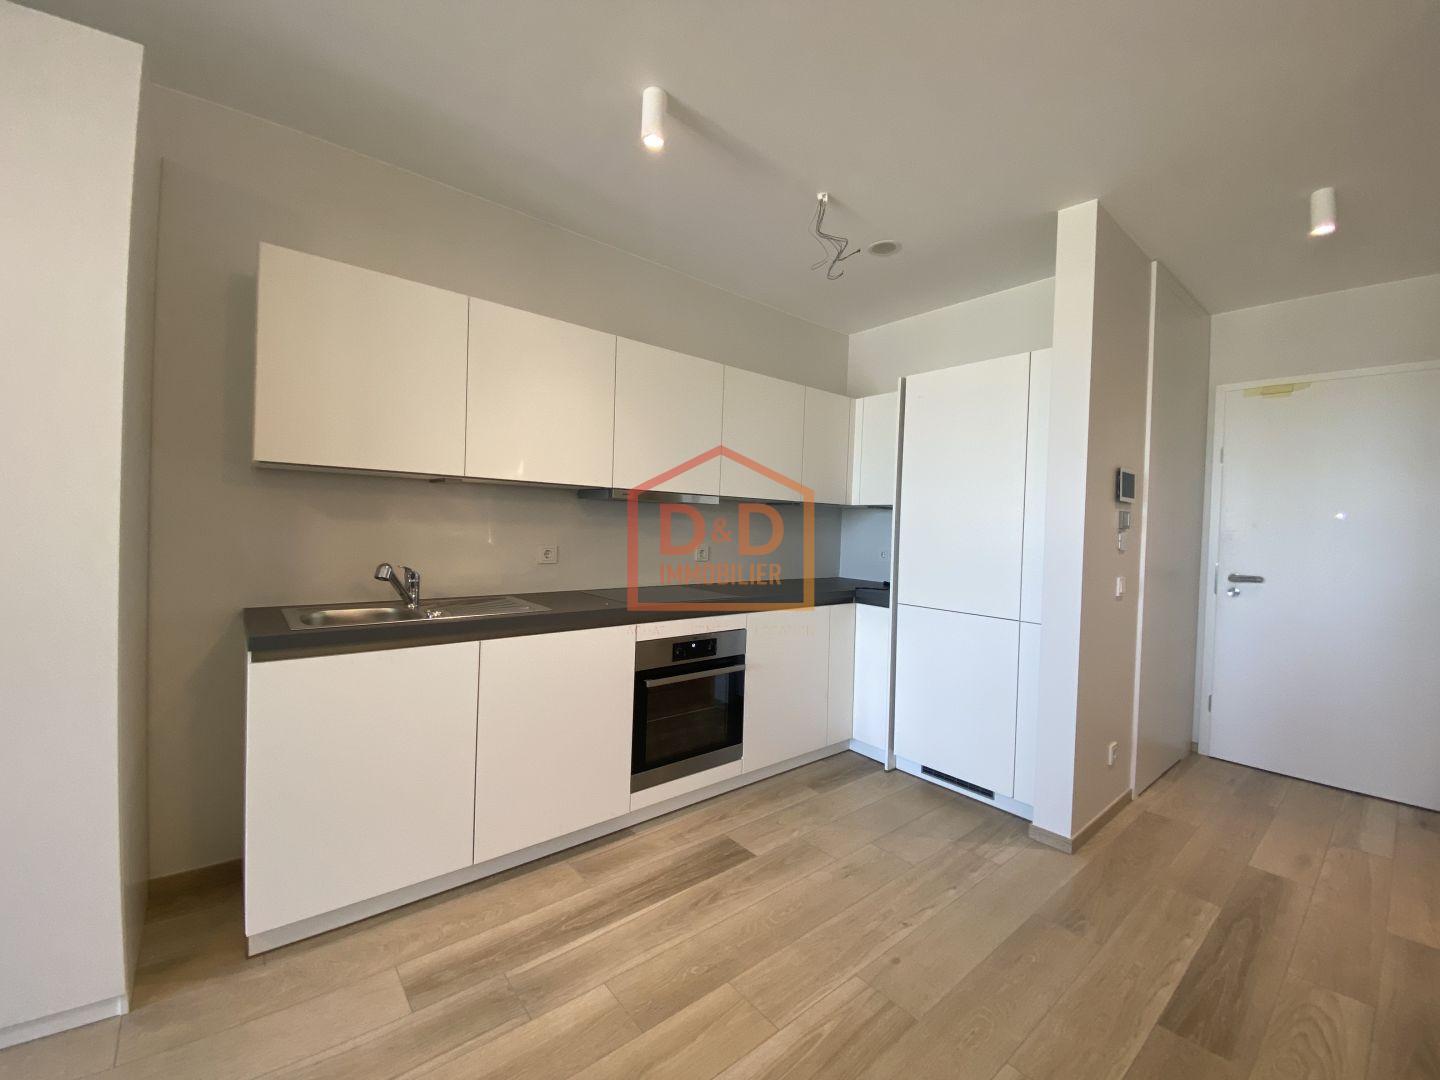 Appartement à Luxembourg, 38 m², 1 450 €/mois